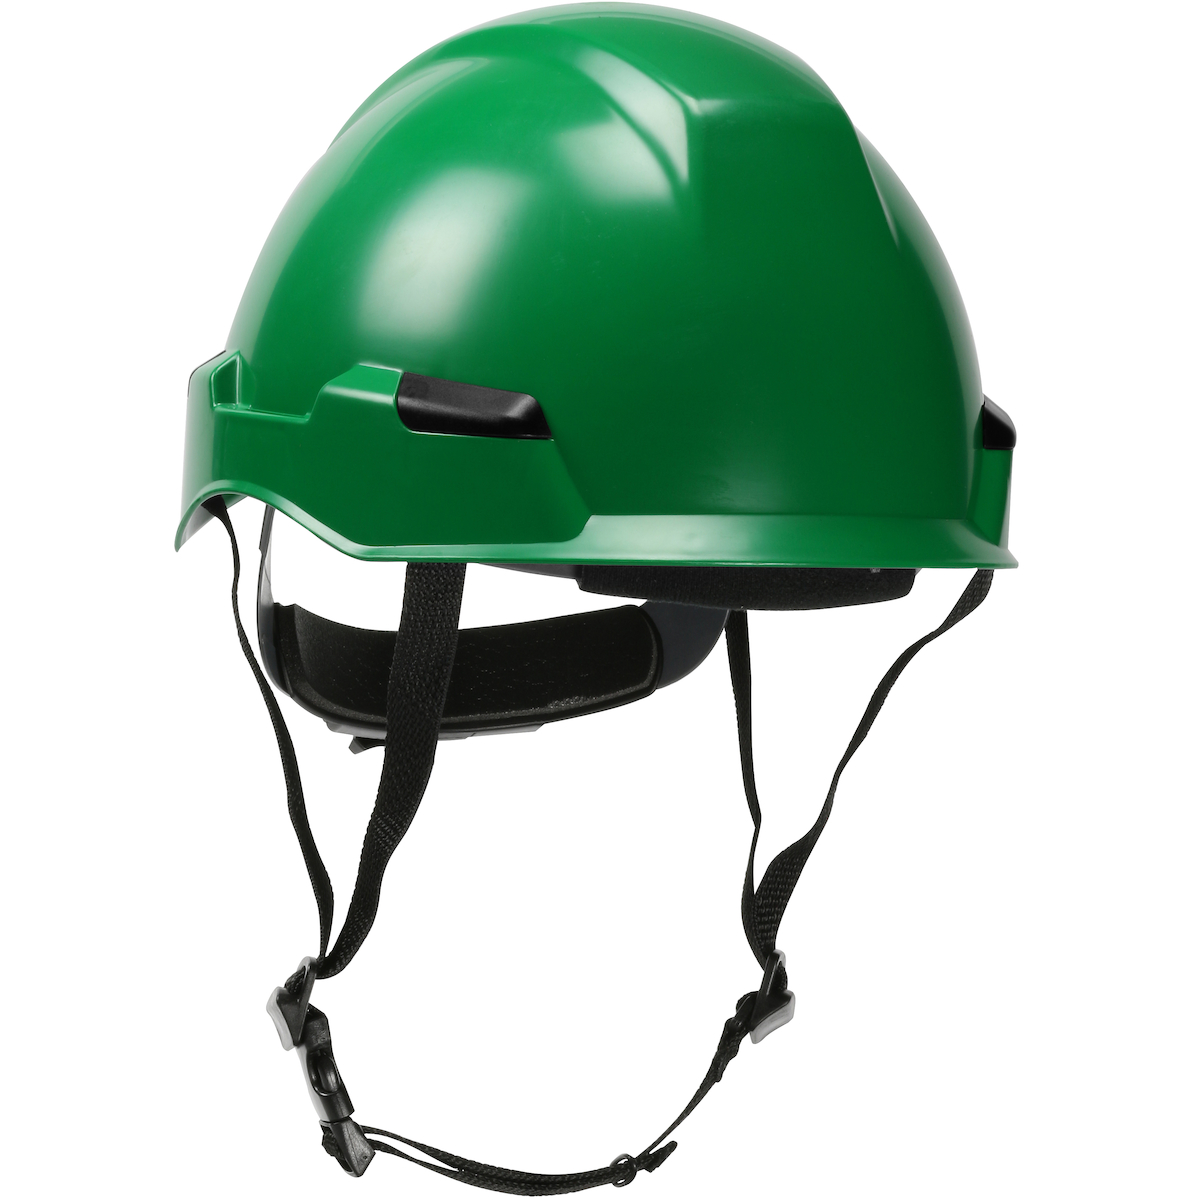 280-HP141R PIP® Dynamic Rocky™ Industrial Climbing Helmet with Polycarbonate / ABS Shell, Nylon Suspension, Wheel Ratchet Adjustment and 4-Point Chin Strap- Green